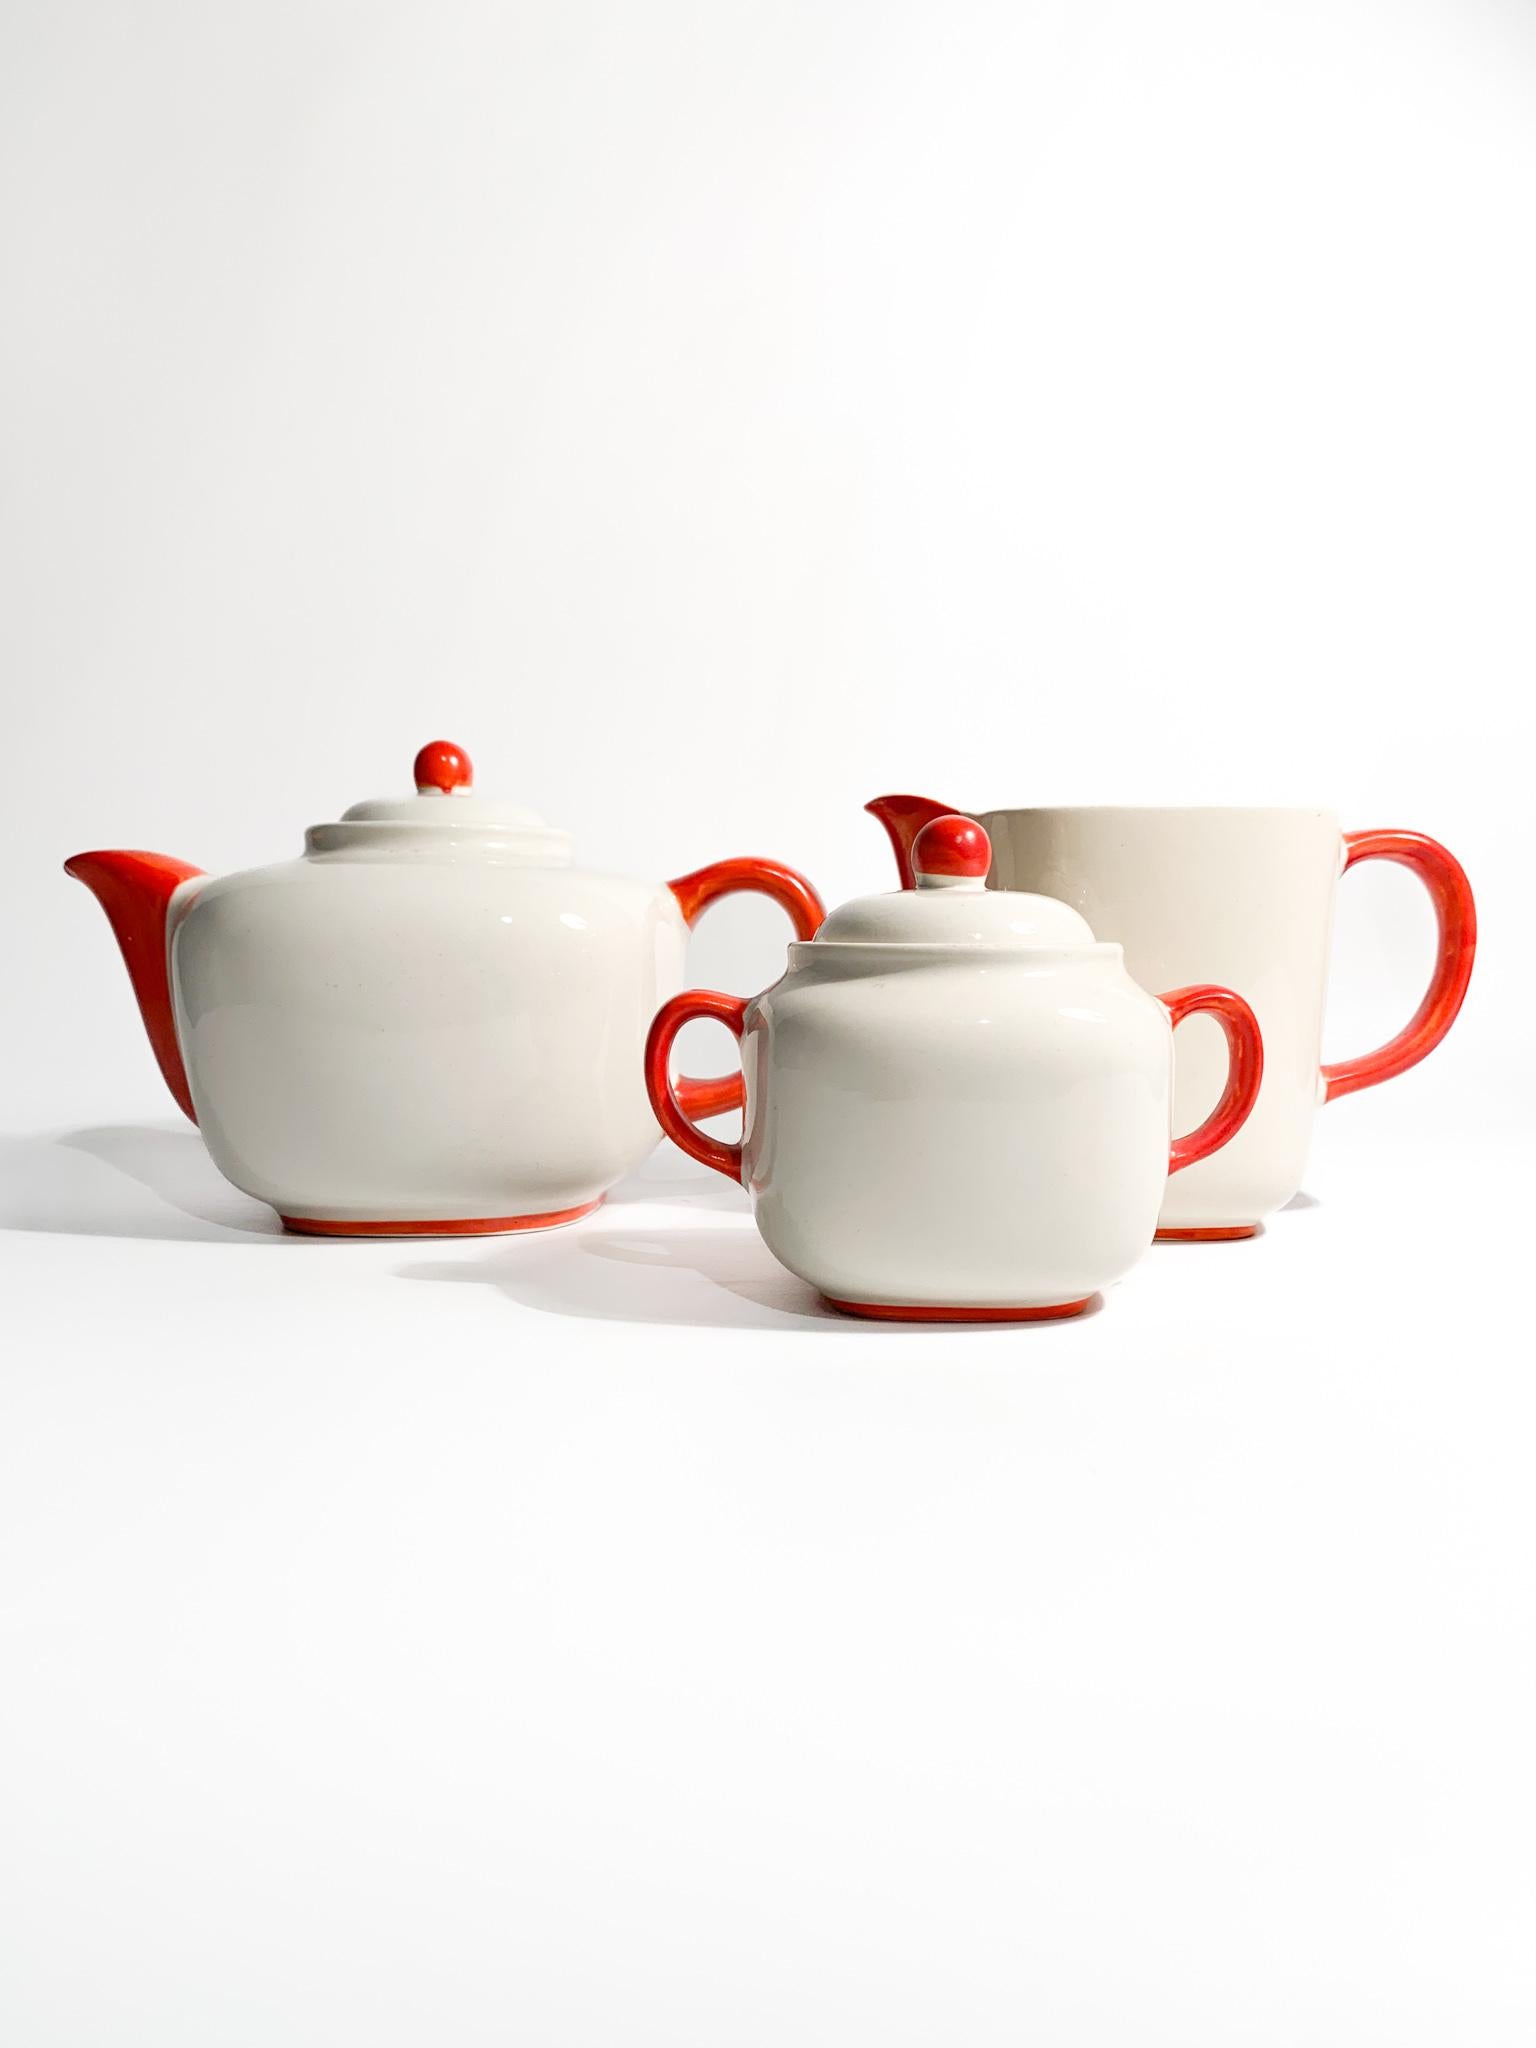 Porcelain Gio Ponti Coffee Serving Set by for Richard Ginori from 1938